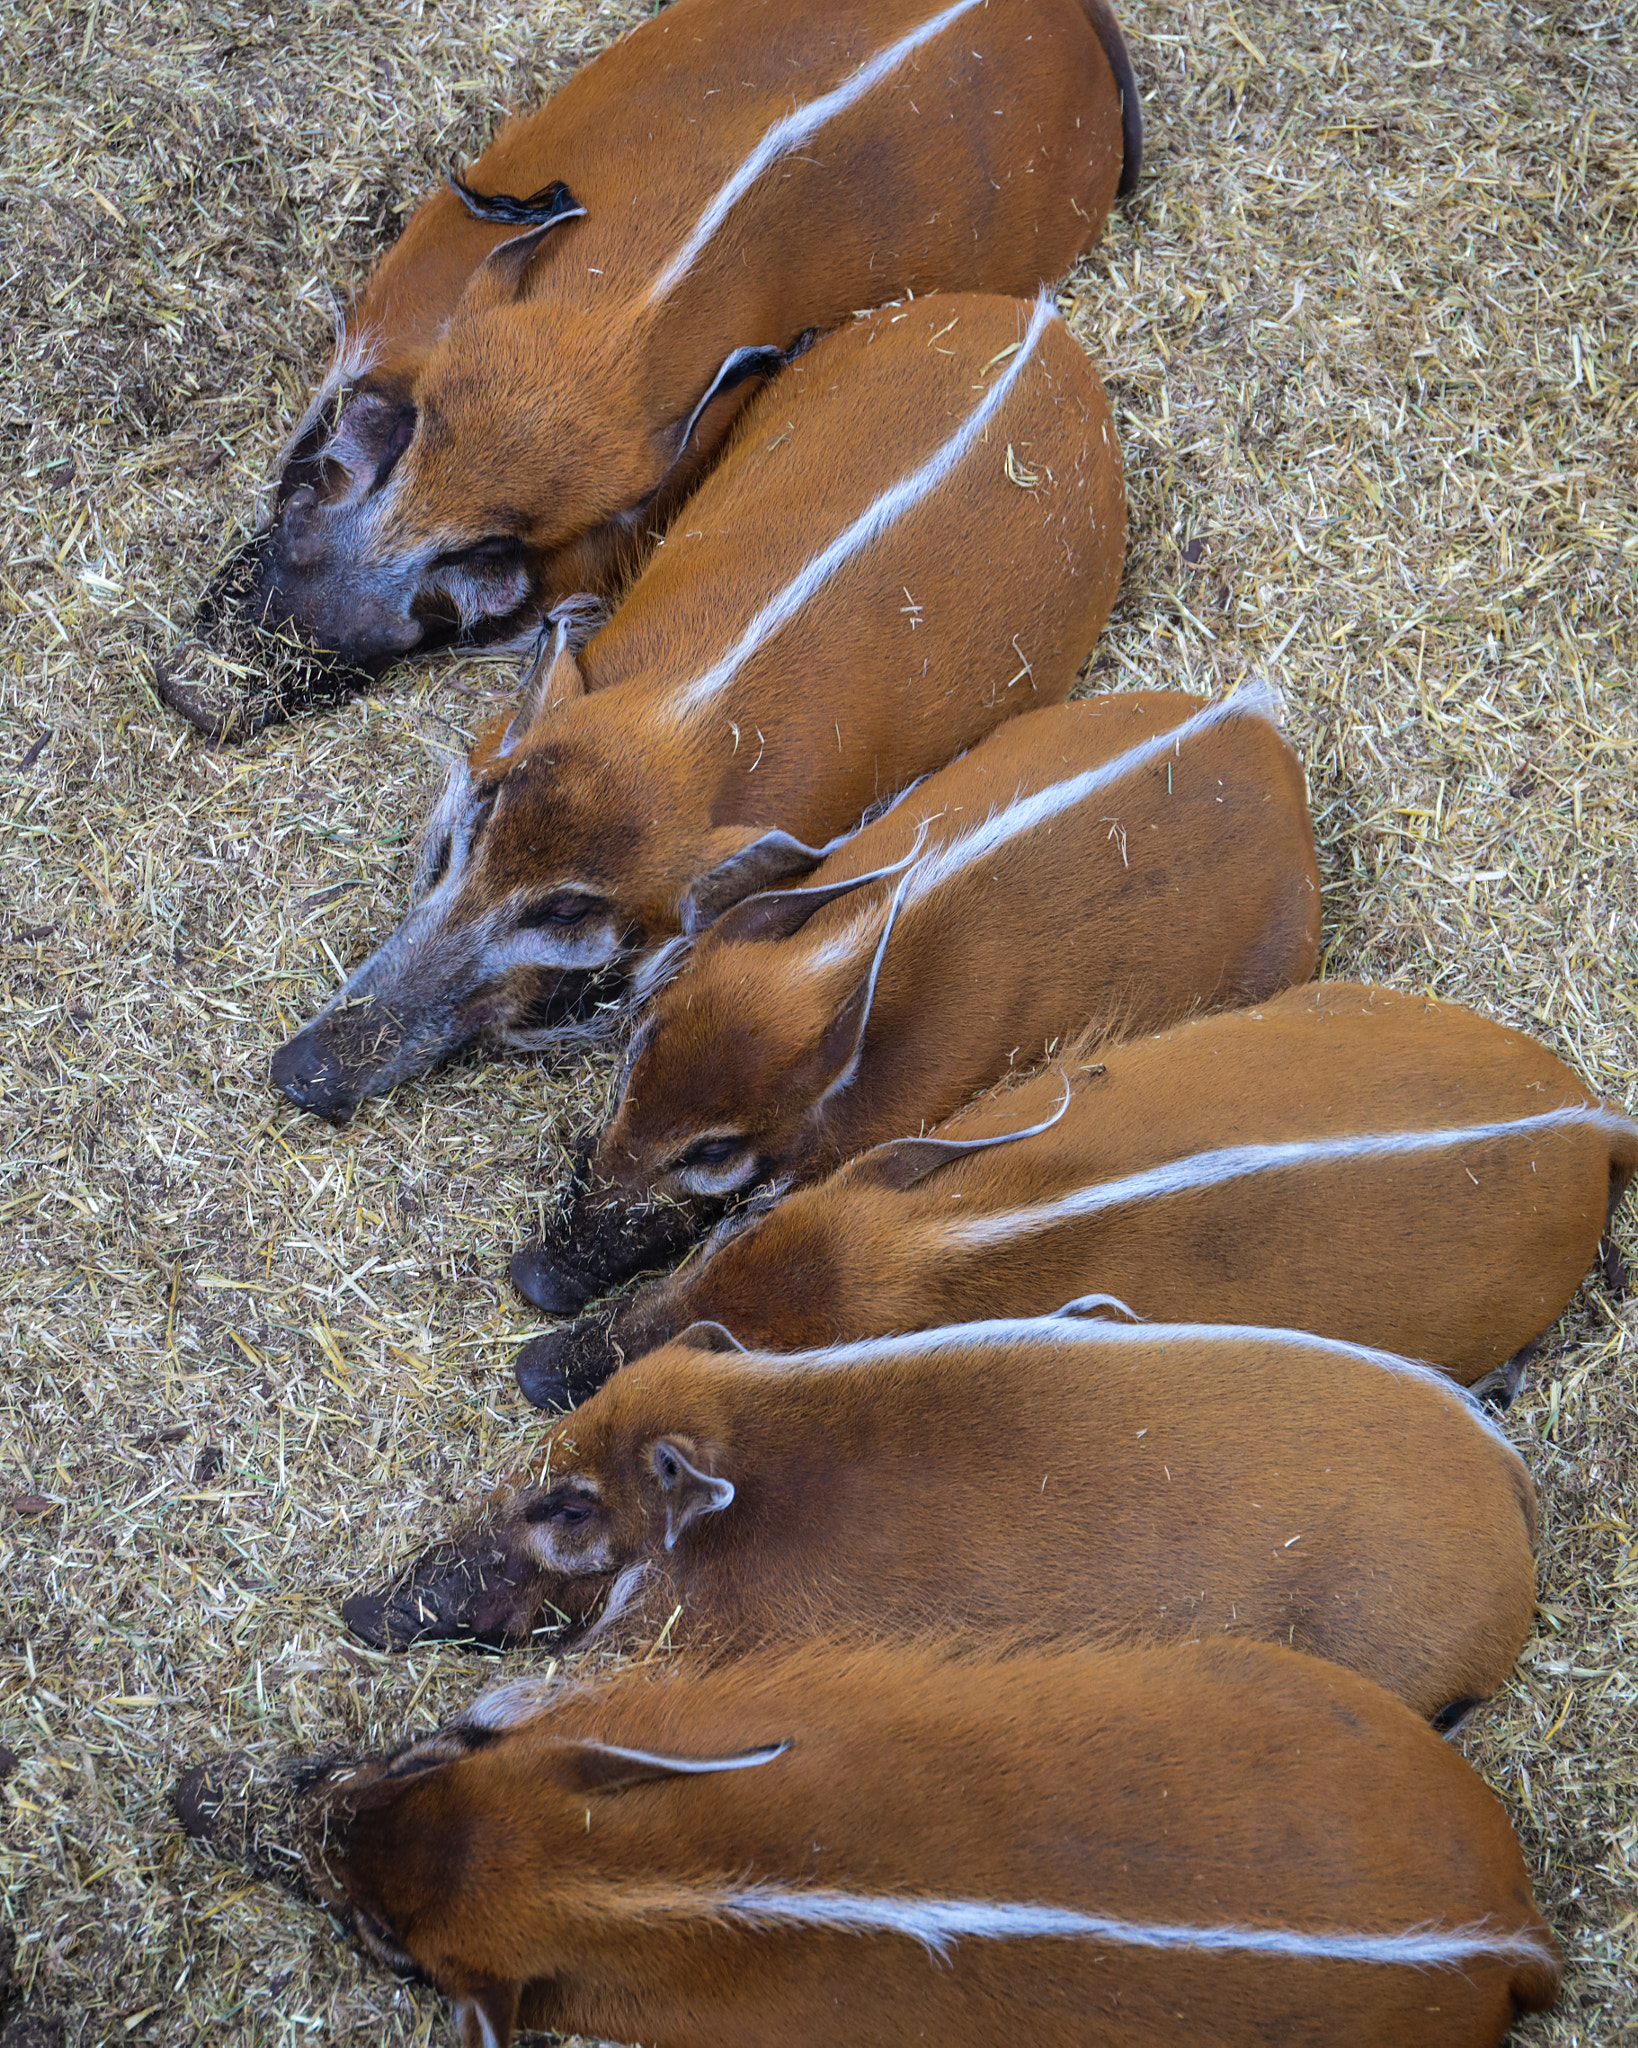 Hogs in a row